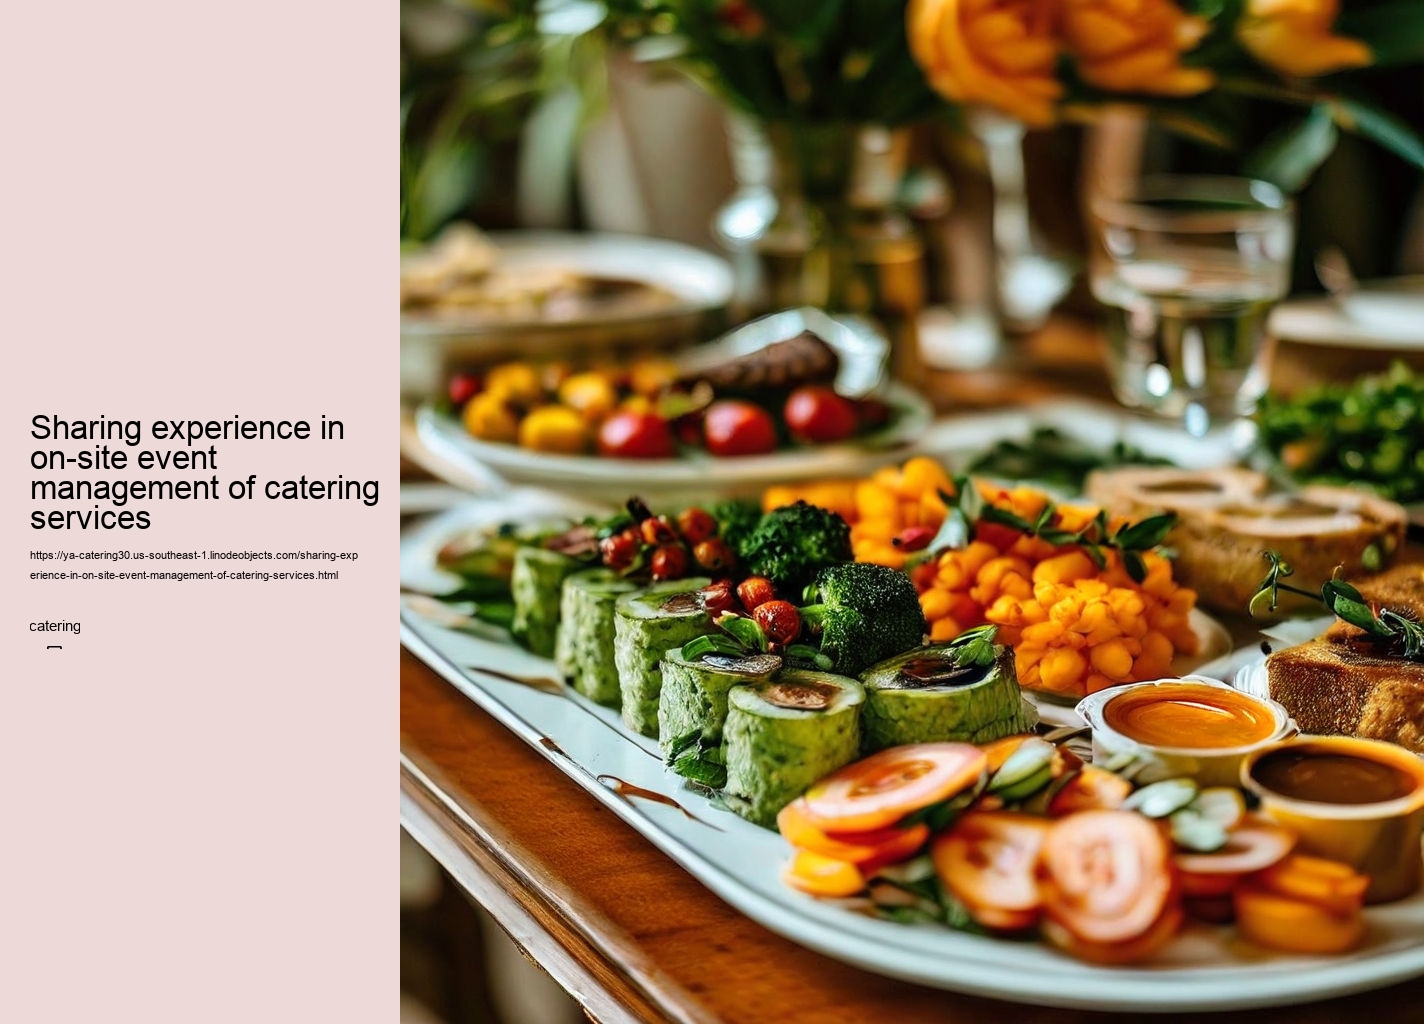 Sharing experience in on-site event management of catering services